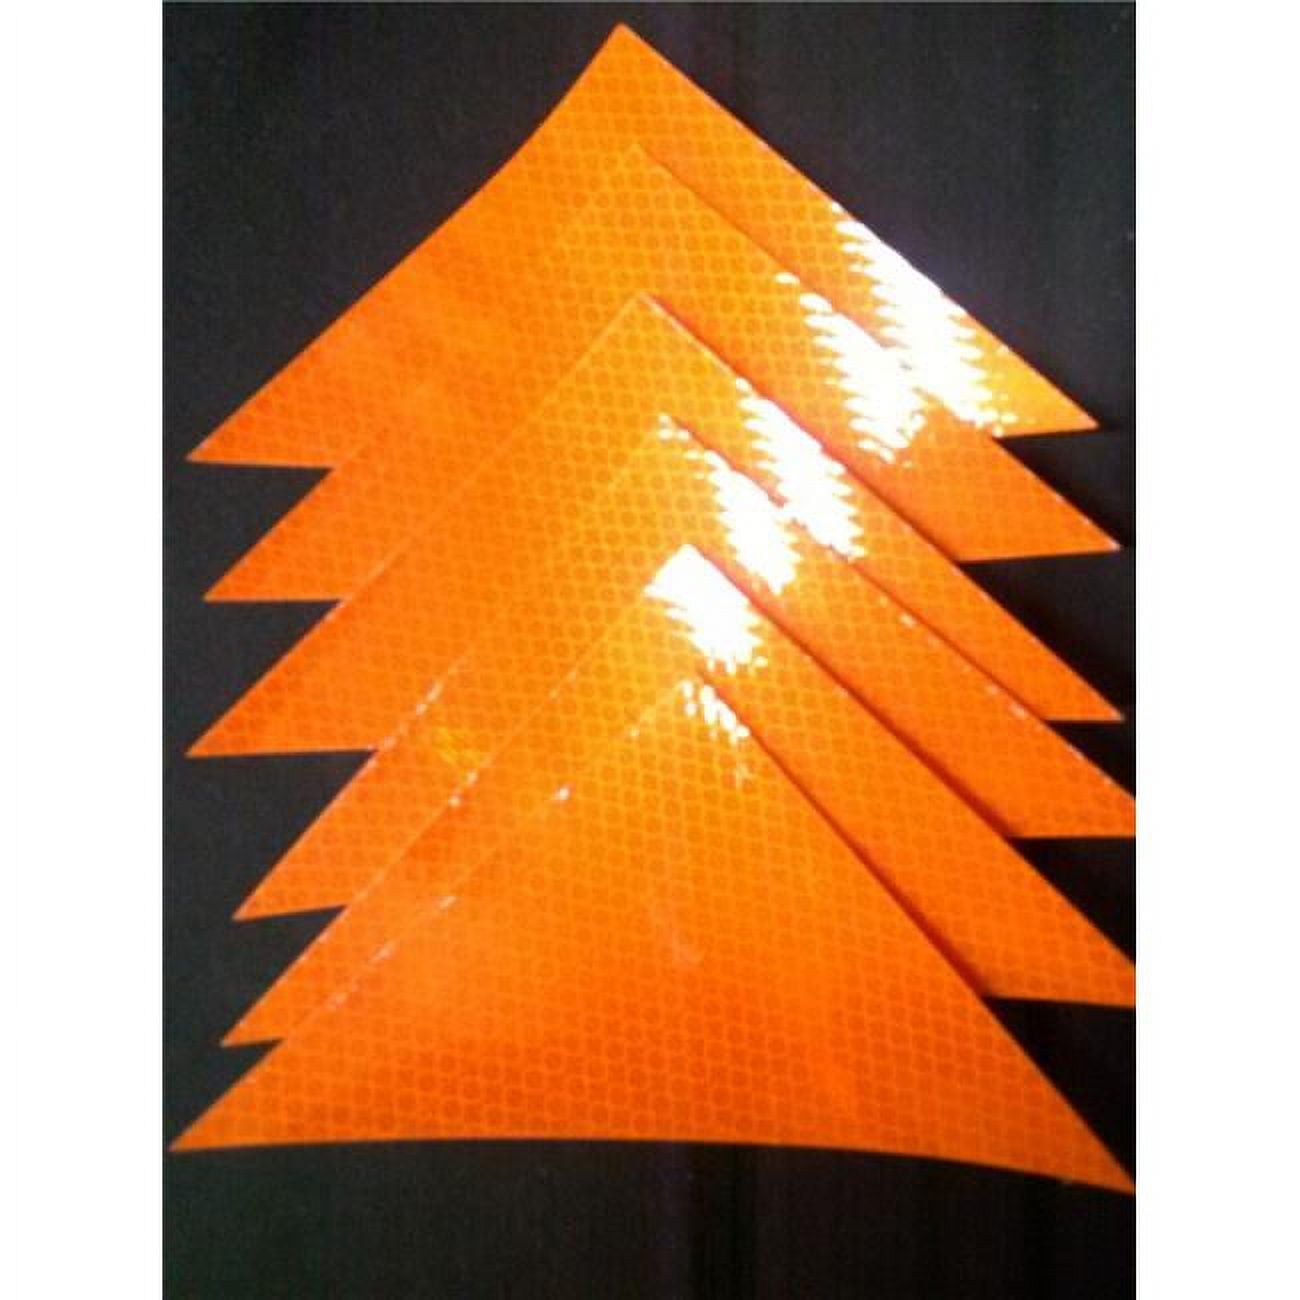 N-rt0406-org Orange Vehicle & Building Reflective Triangles - Pack Of 6